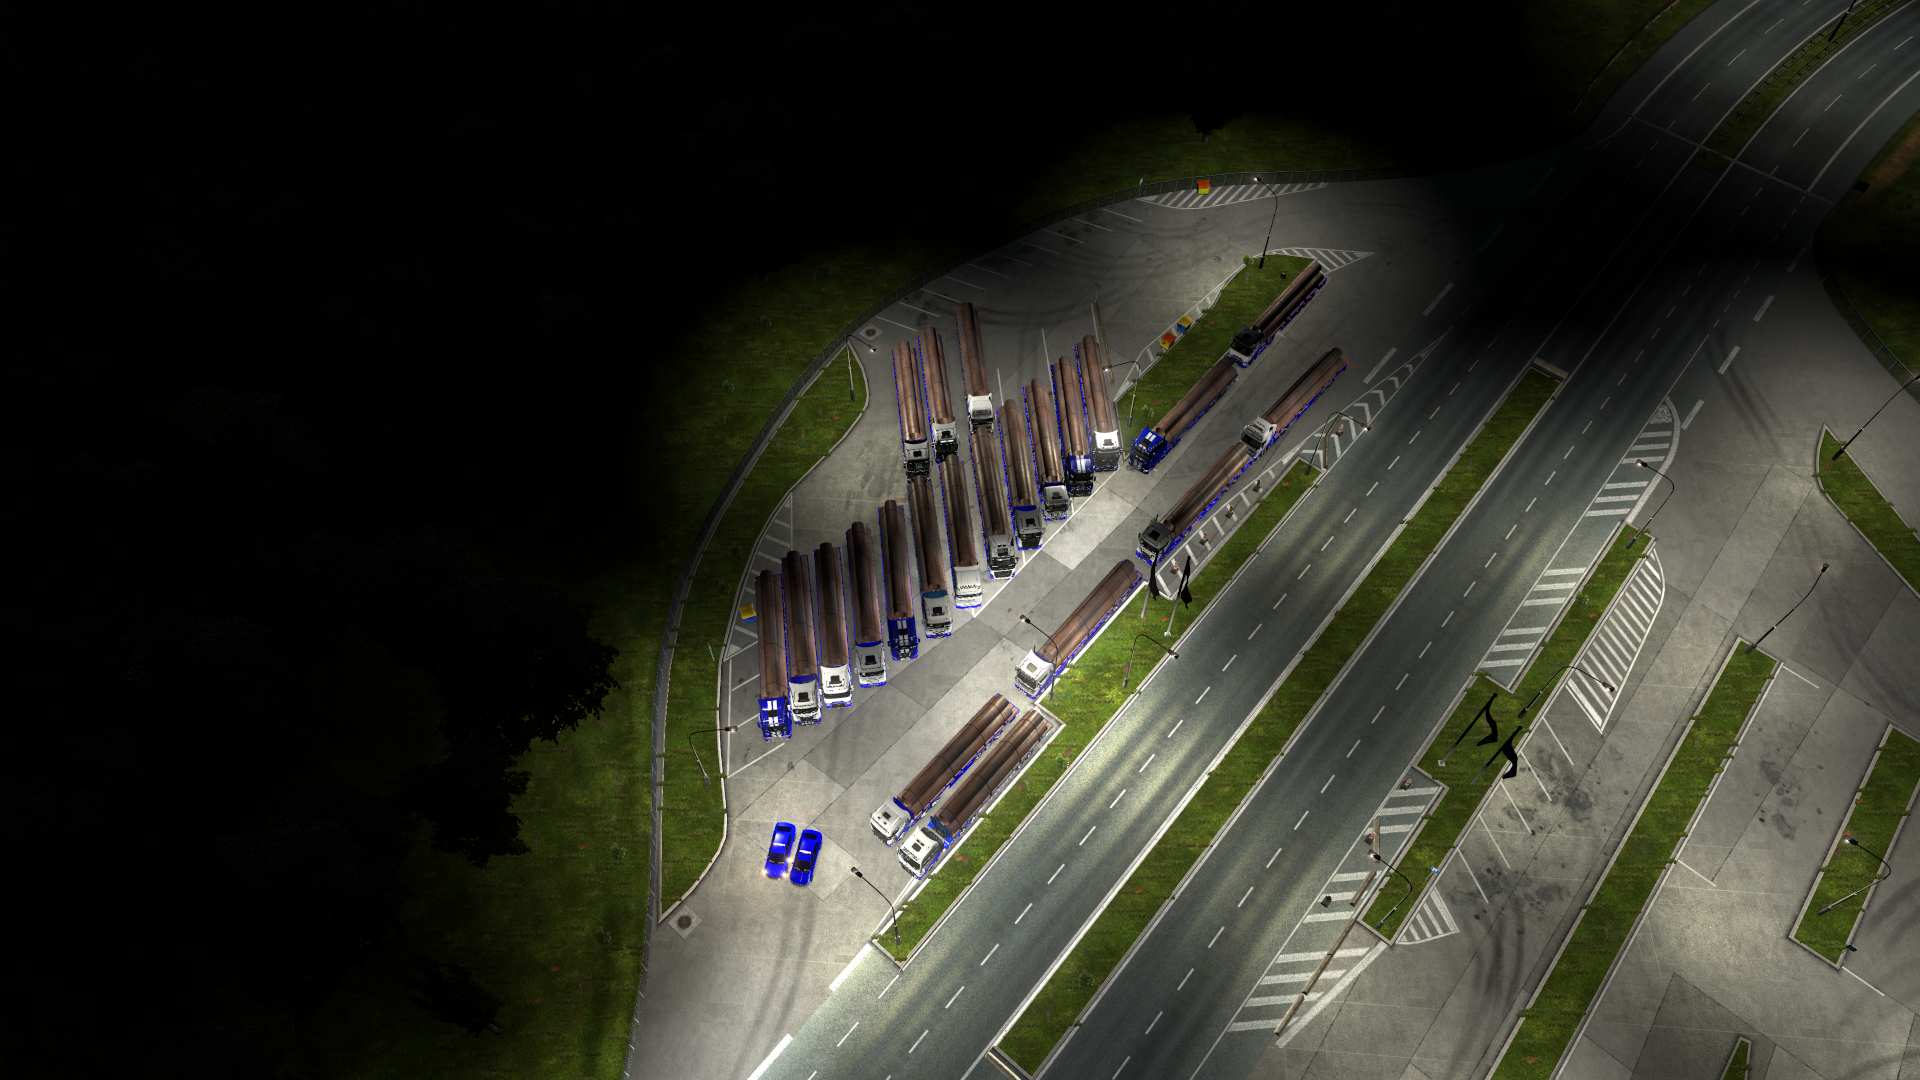 ets2_20200417_234451_00.png